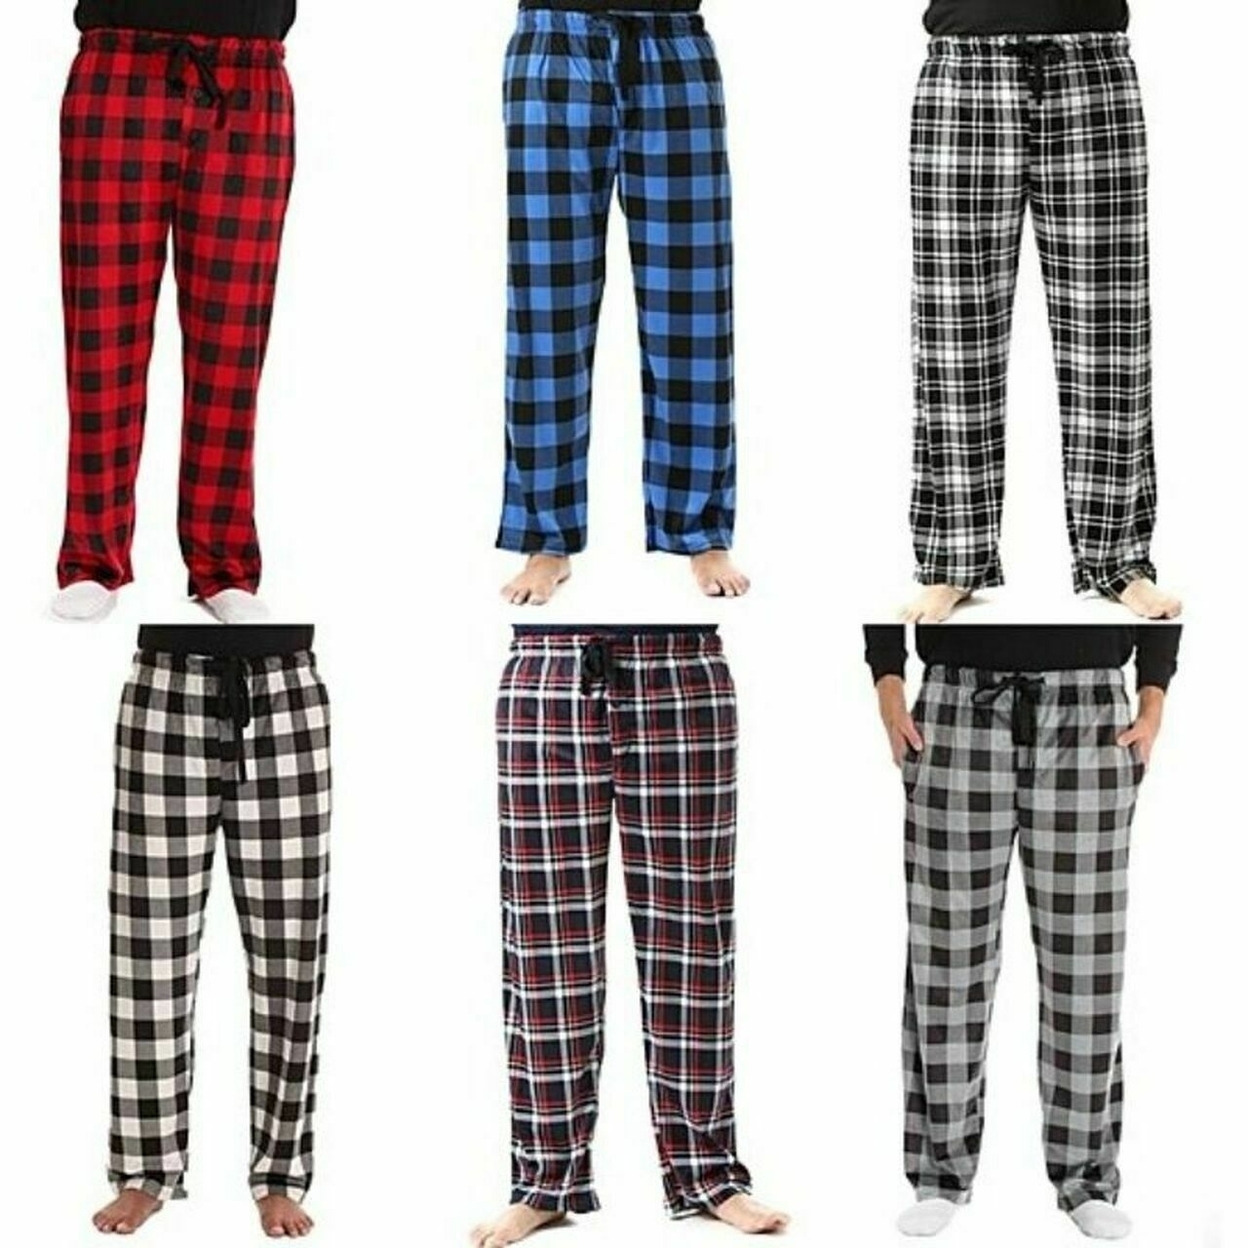 2-Pack: Men's Ultra Soft Cozy Flannel Fleece Plaid Pajama Sleep Bottom Lounge Pants - Red & Red, Large